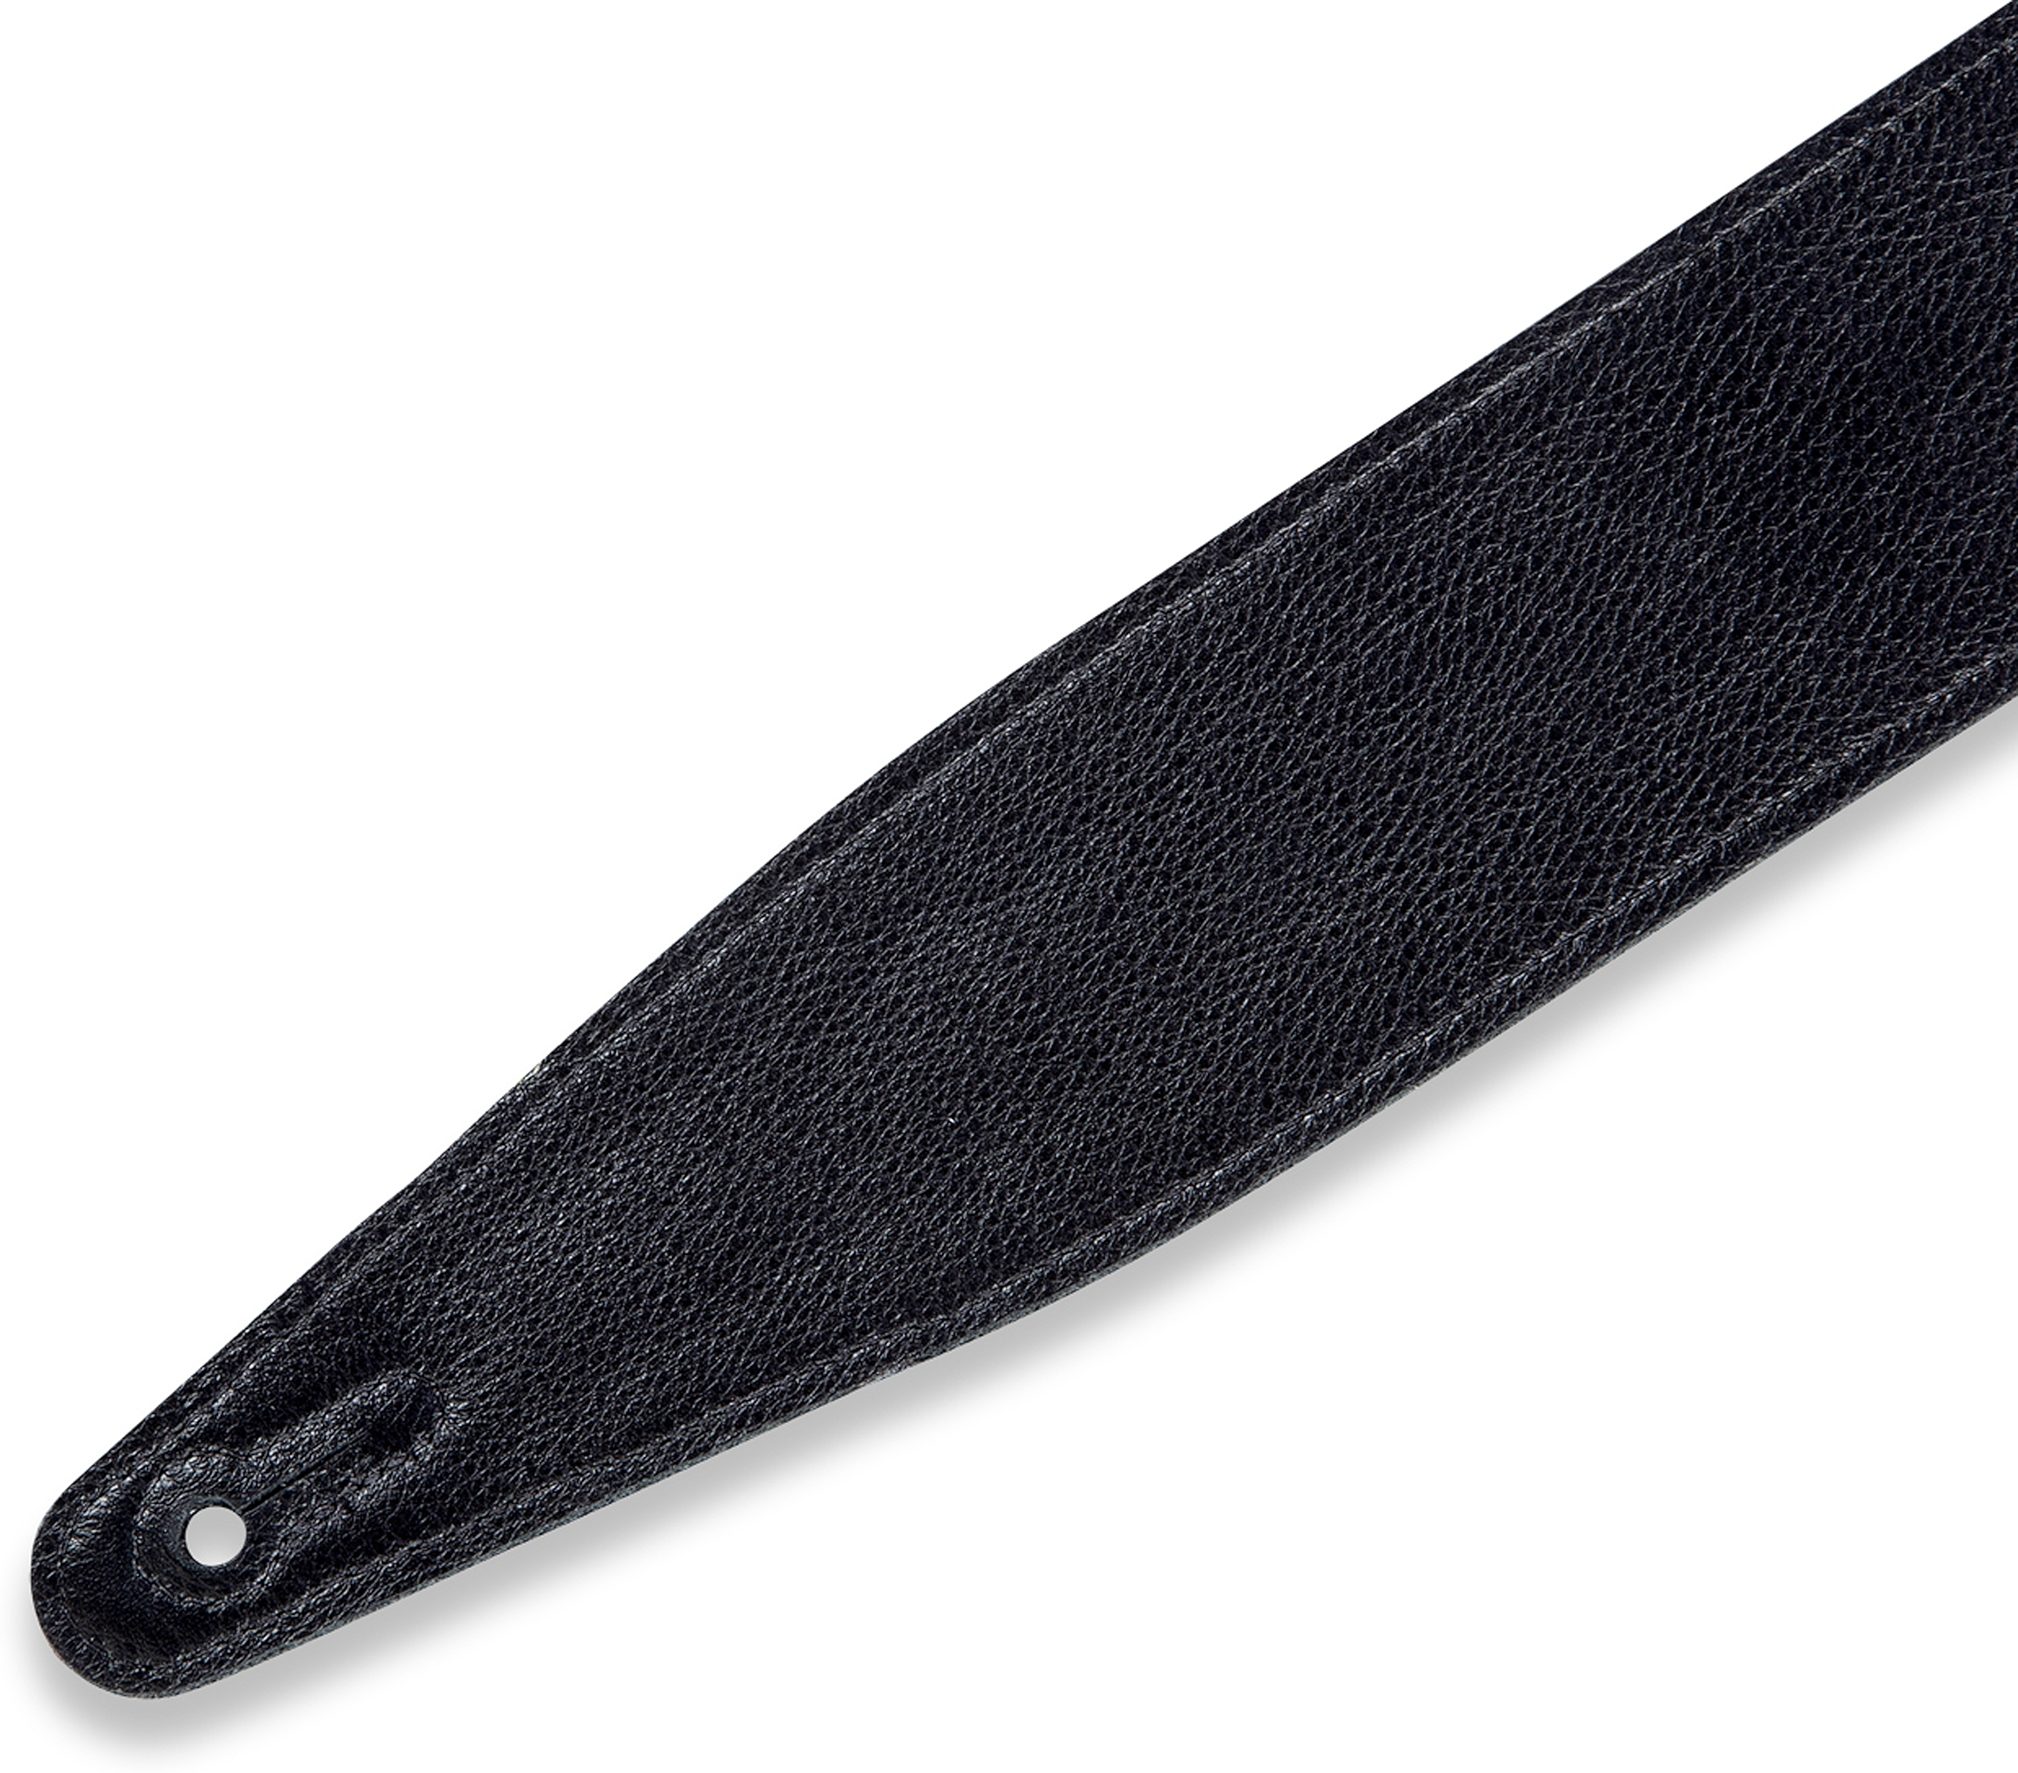 Levy's Deluxe Series Dart Garment Leather Guitar Strap | zZounds